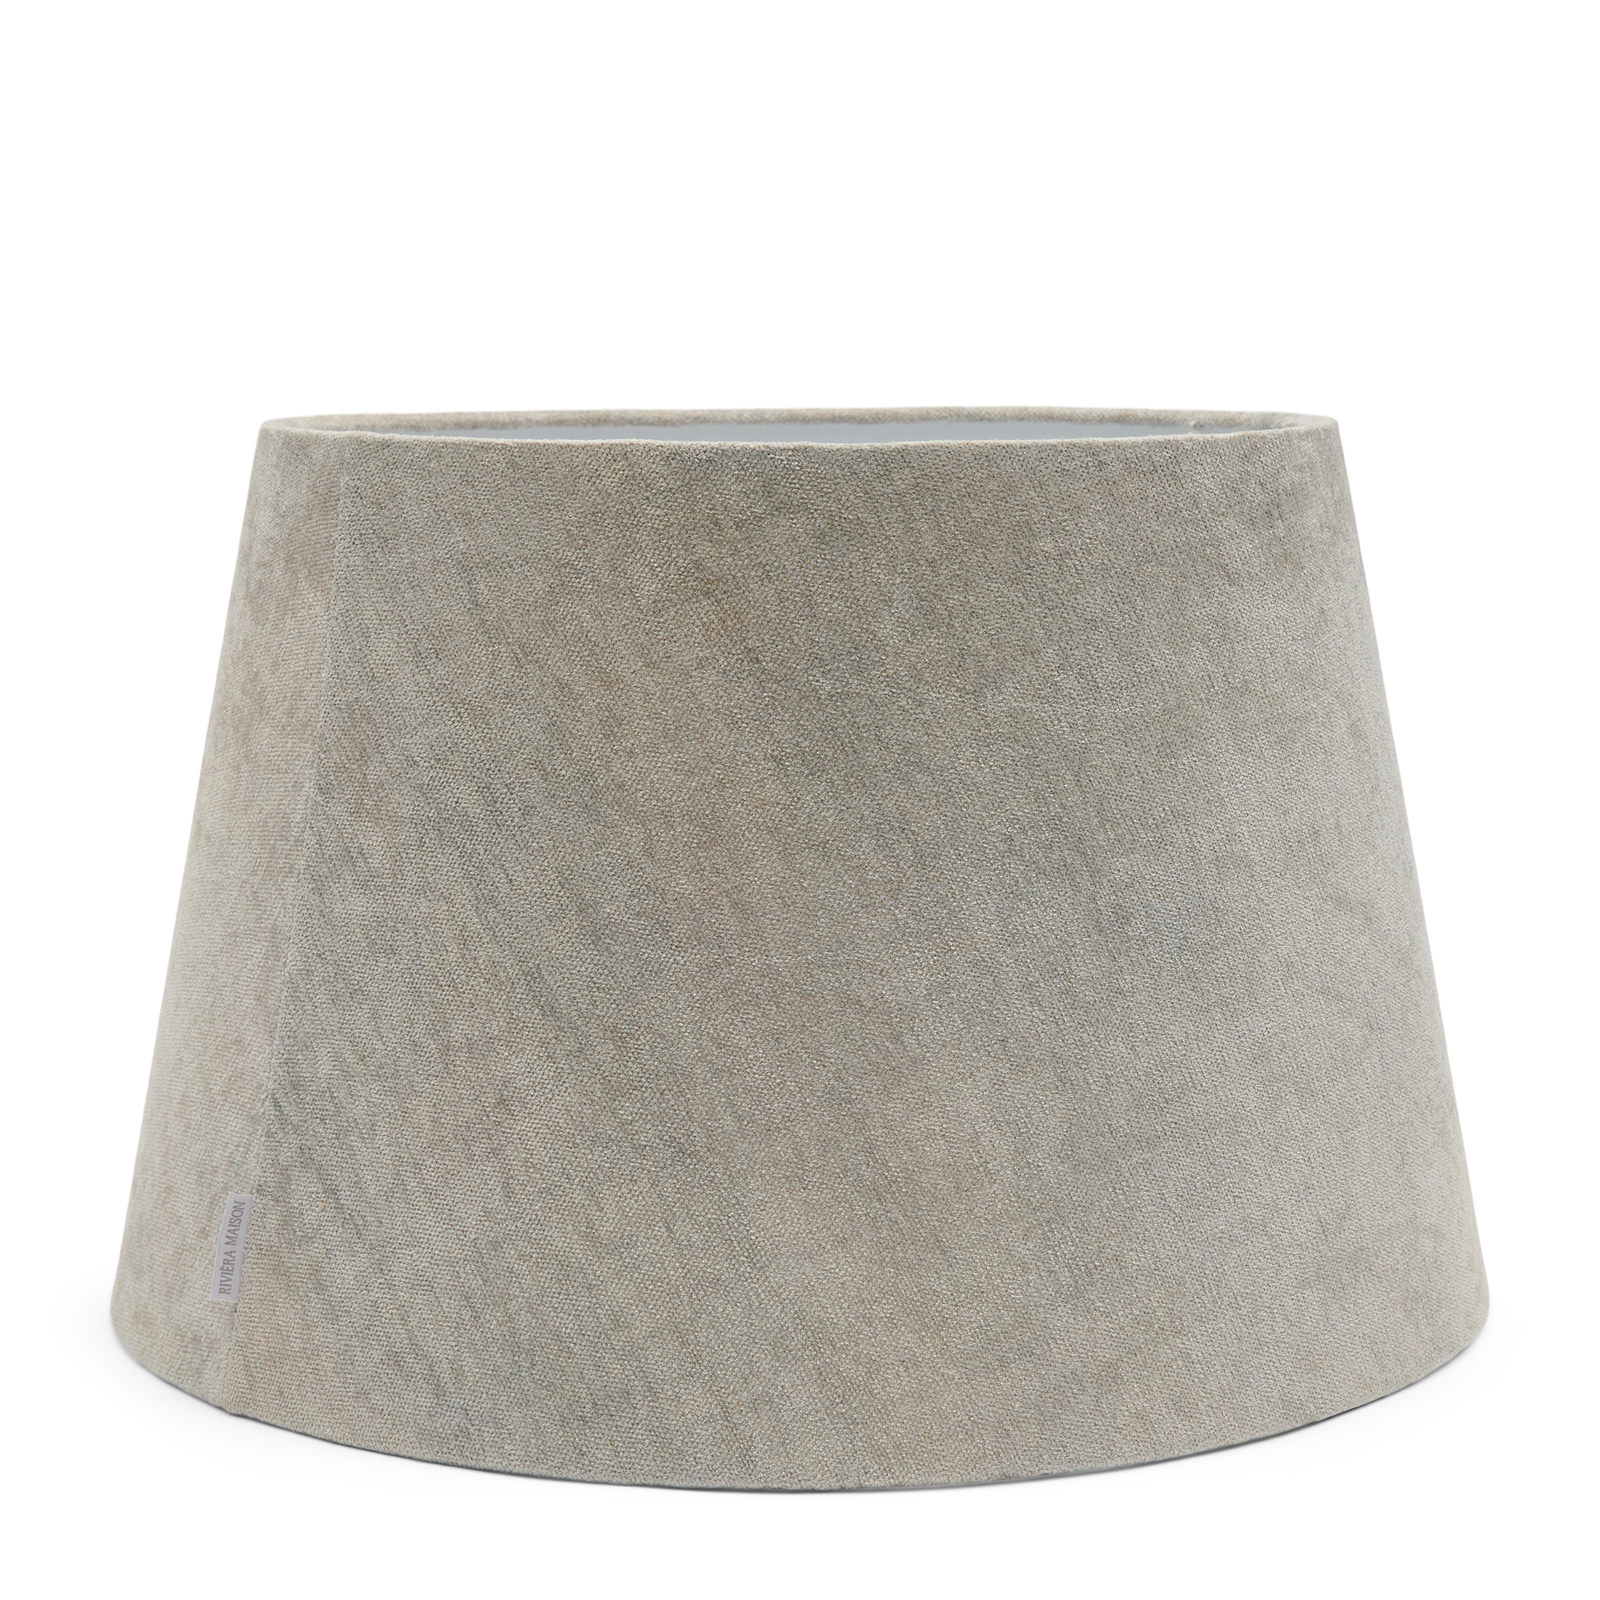 Phinesse Lampshade grey 35x55